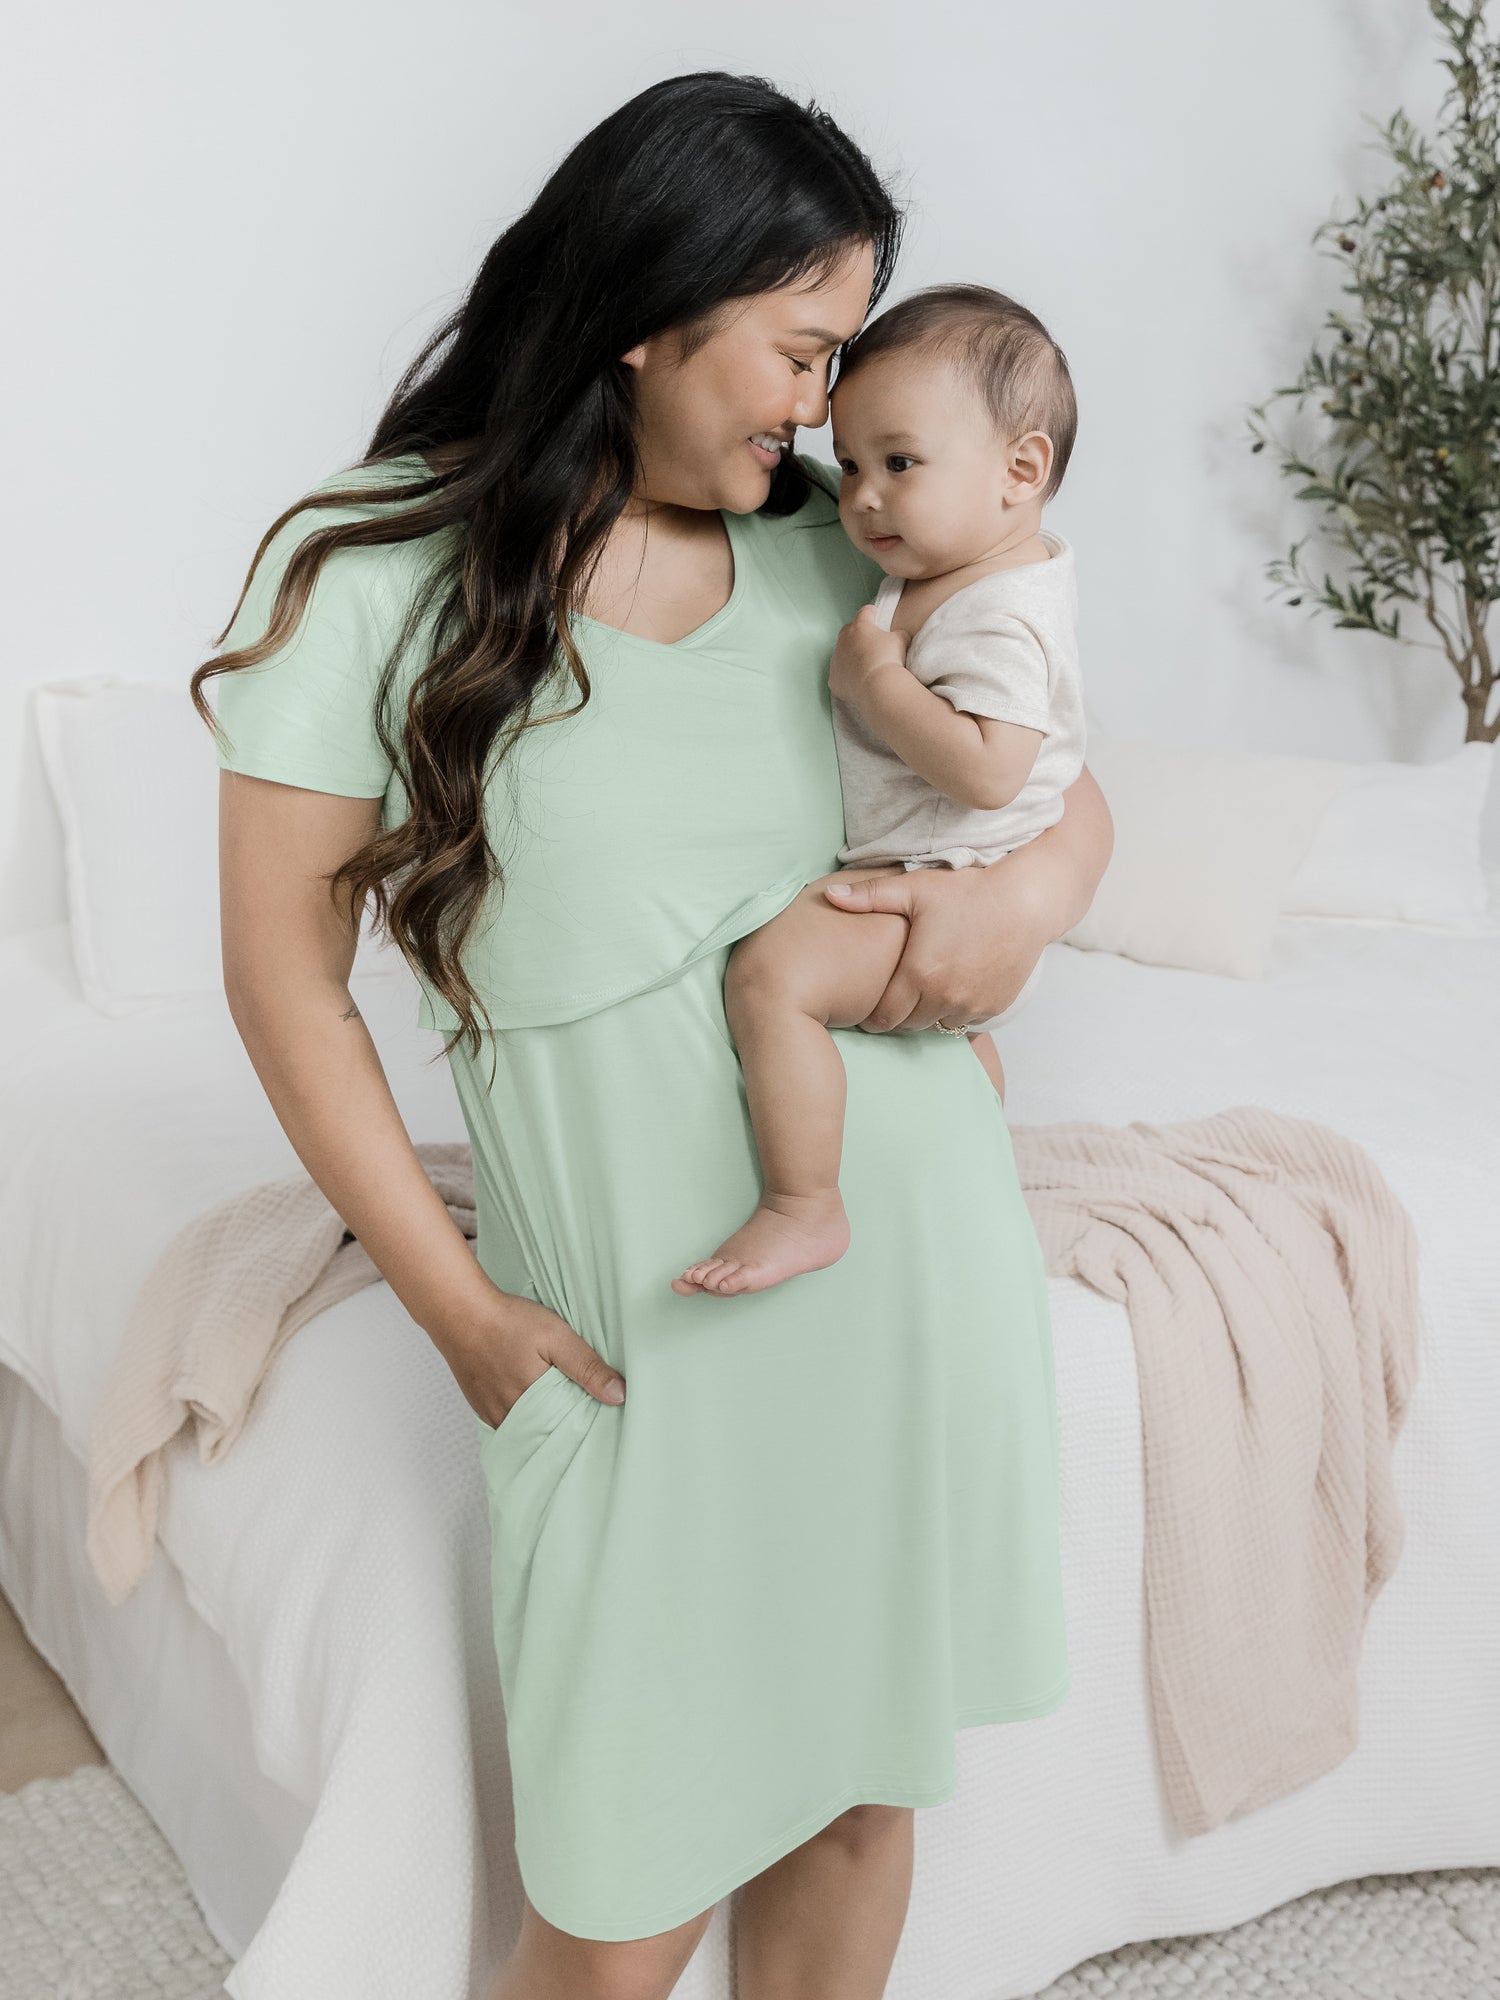 Model holding her baby on her hip standing in front of a bed and wearing the Eleanora Bamboo Maternity & Nursing Dress in Soft Mint. @model_info:Binc is 5'5" and wearing a Medium.